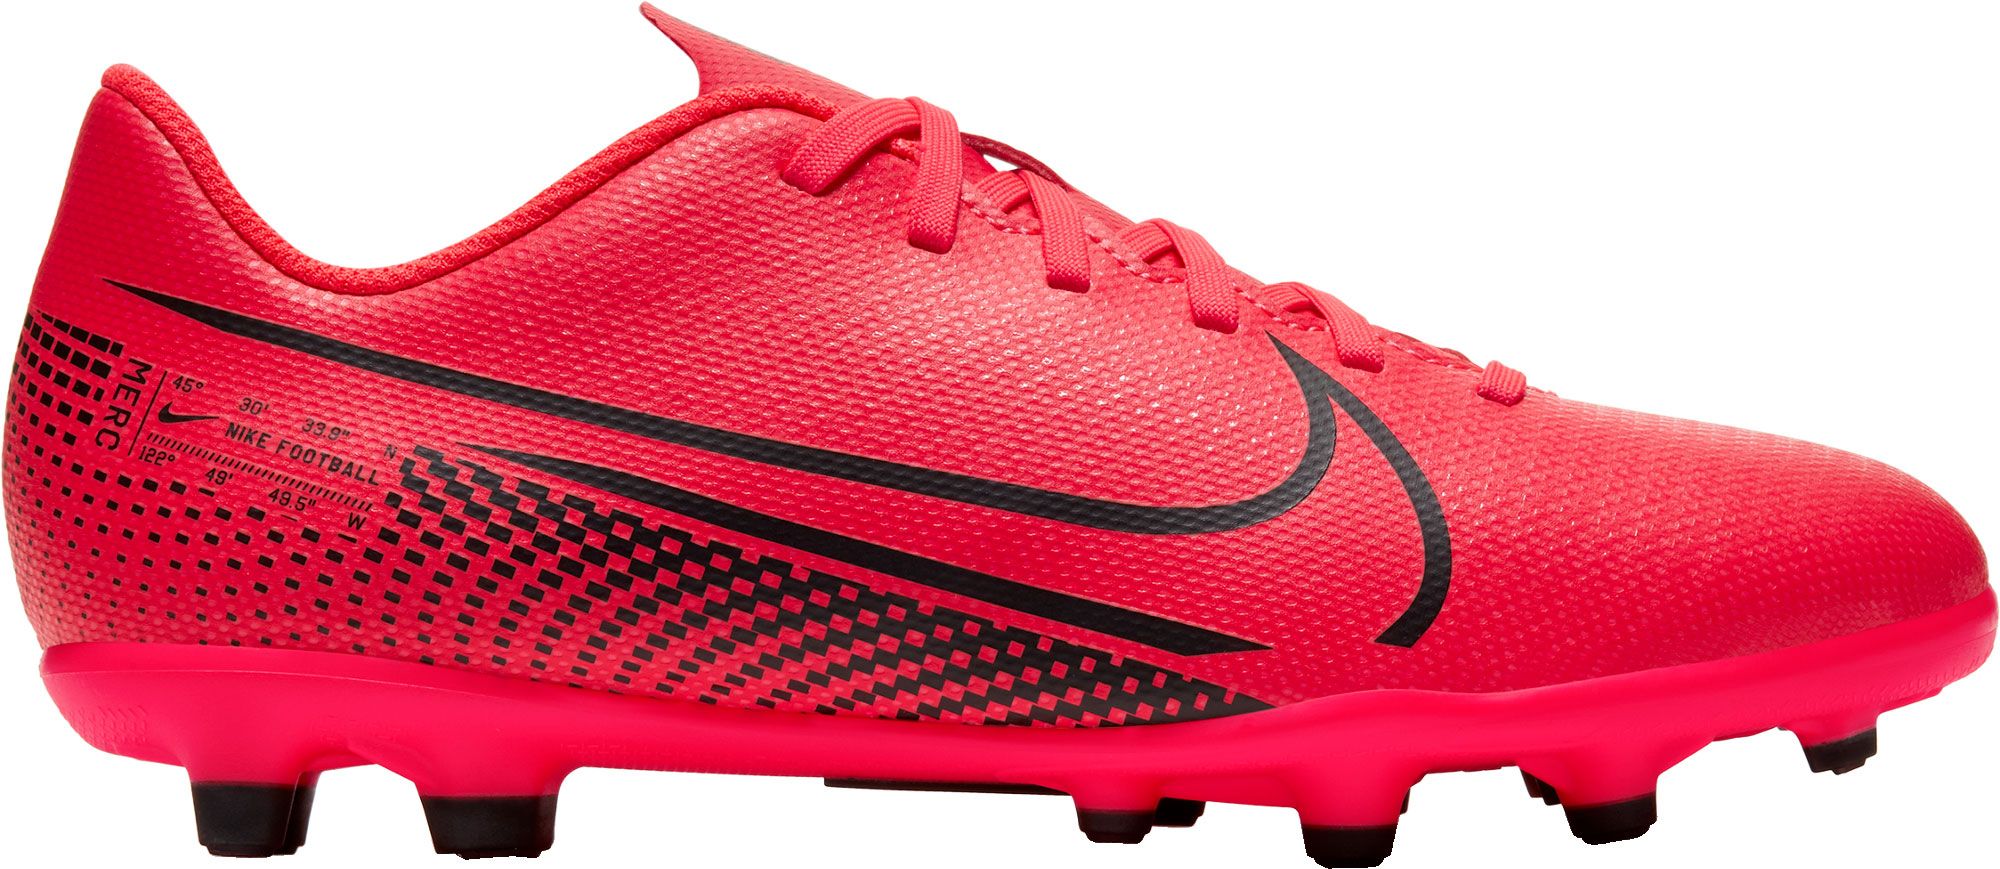 nike soccer cleats red and black